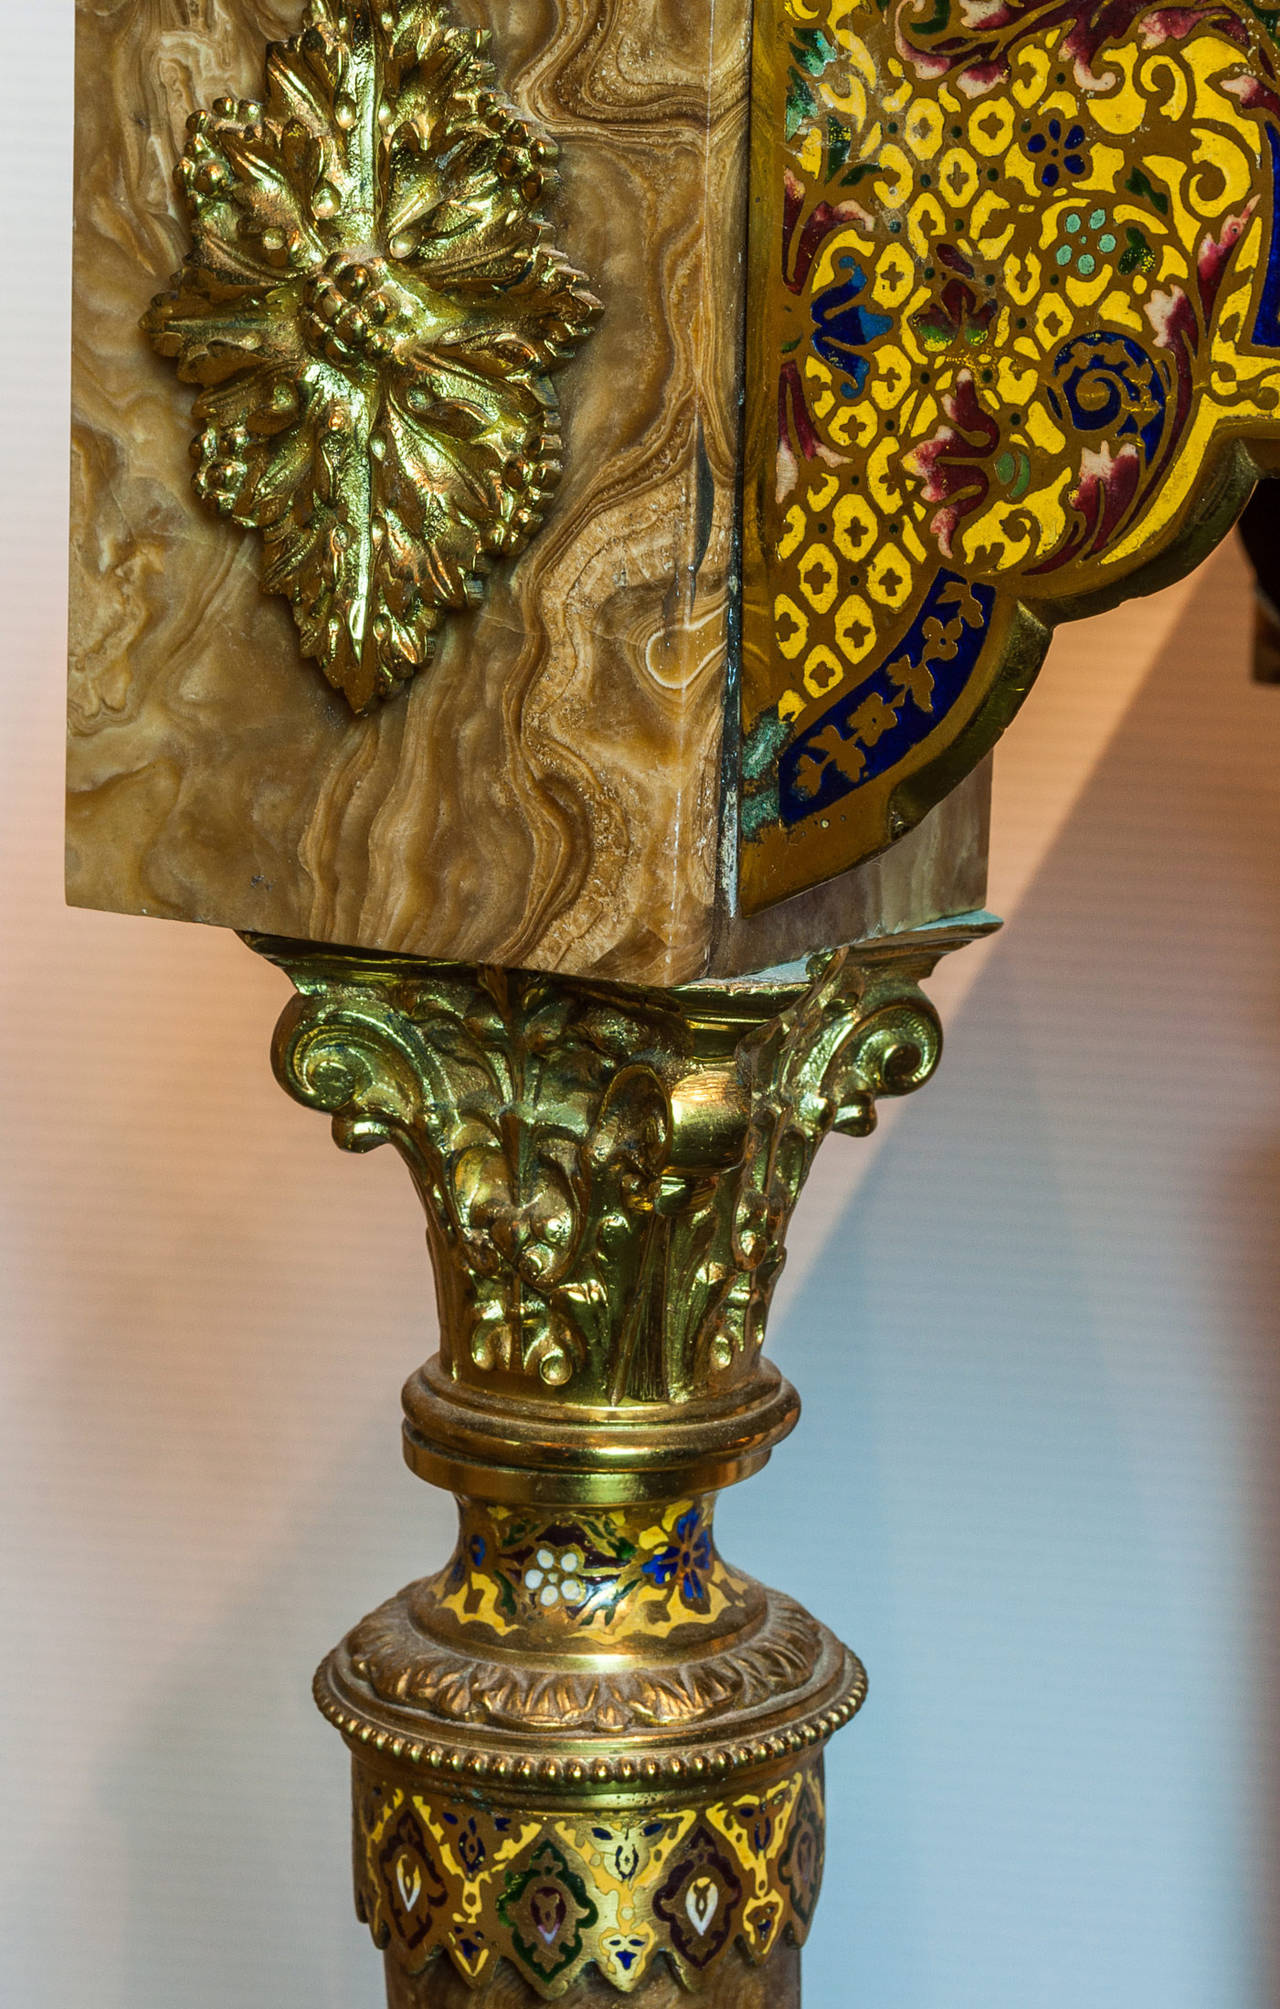 A fine French gilt bronze, onyx and champlevé enamel side table.
Stock number: F36.